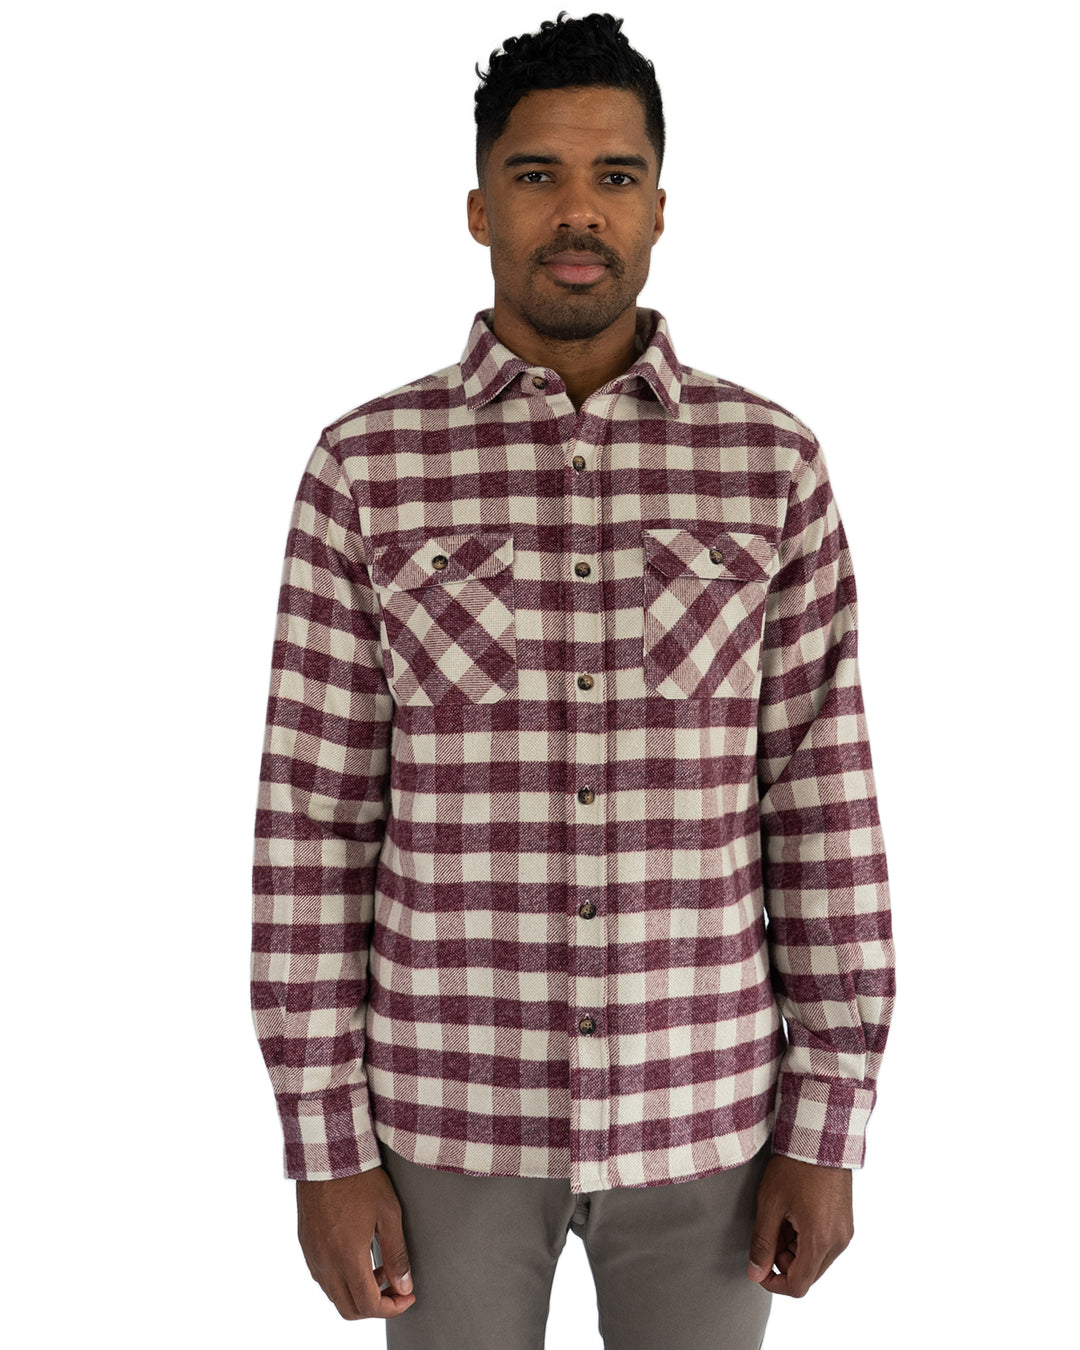 Grand Flannel Shirt in Currant